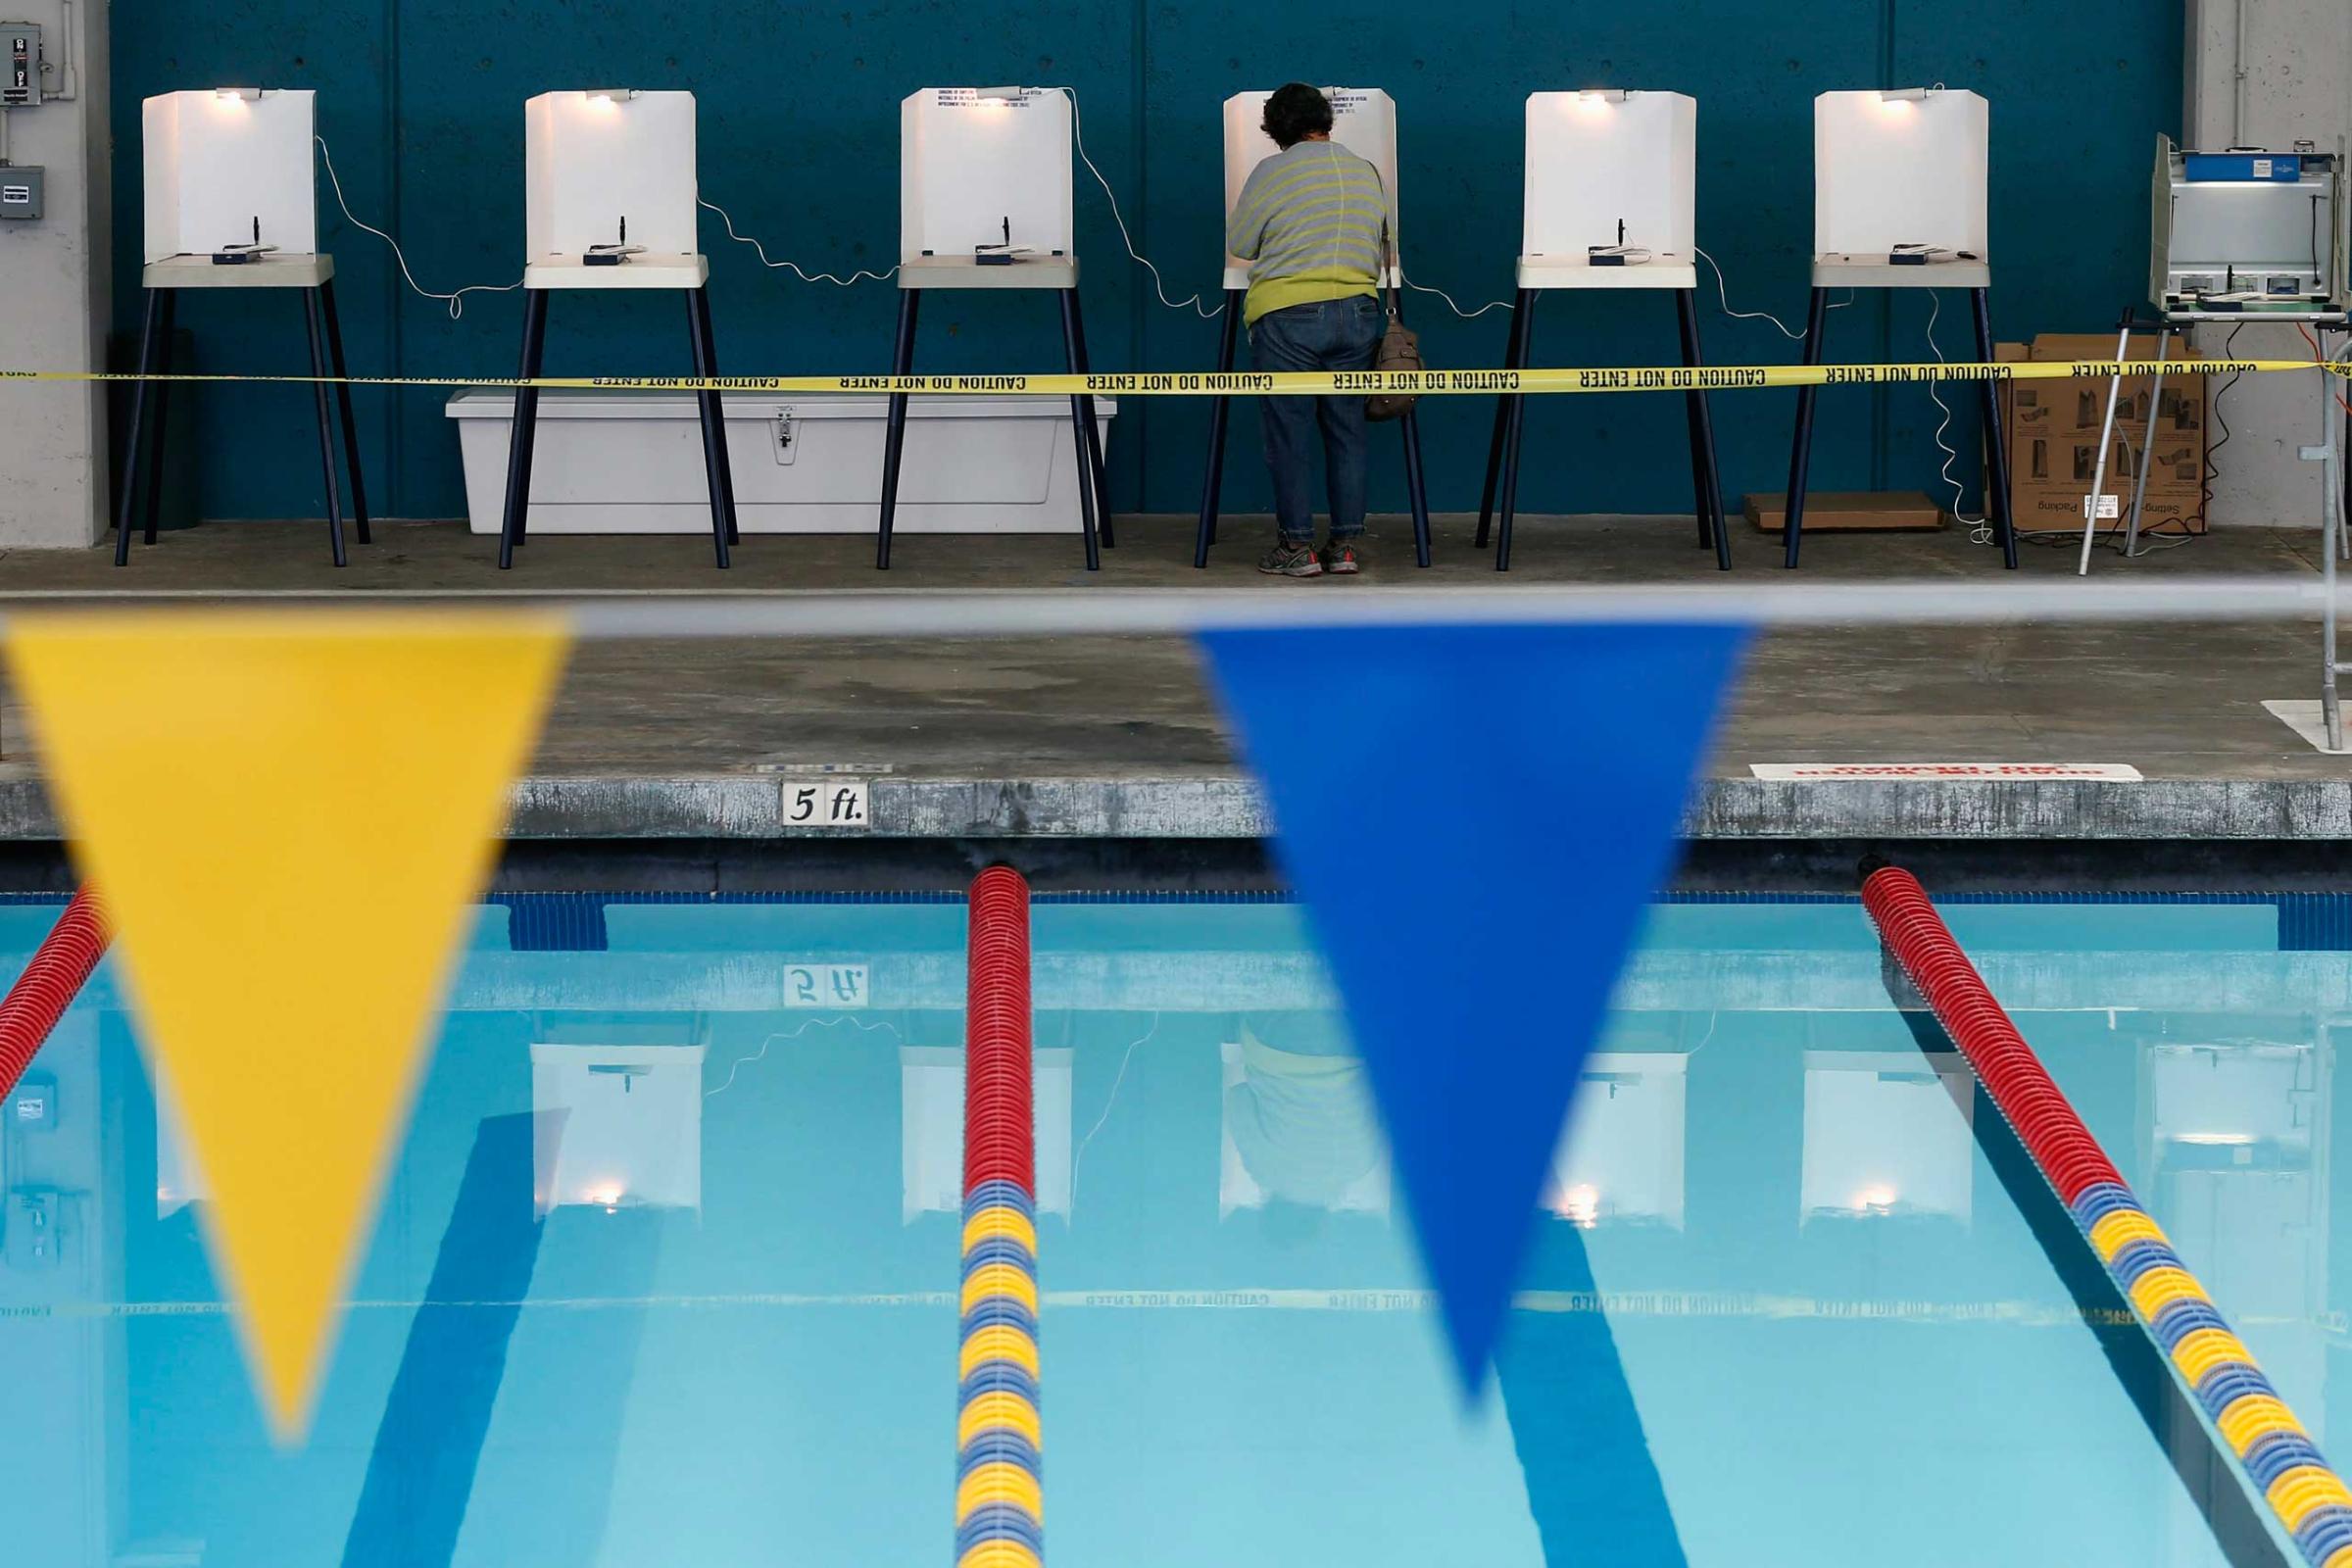 A woman fills out her ballot at a polling place at a swimming pool on Election Day in Los Angeles